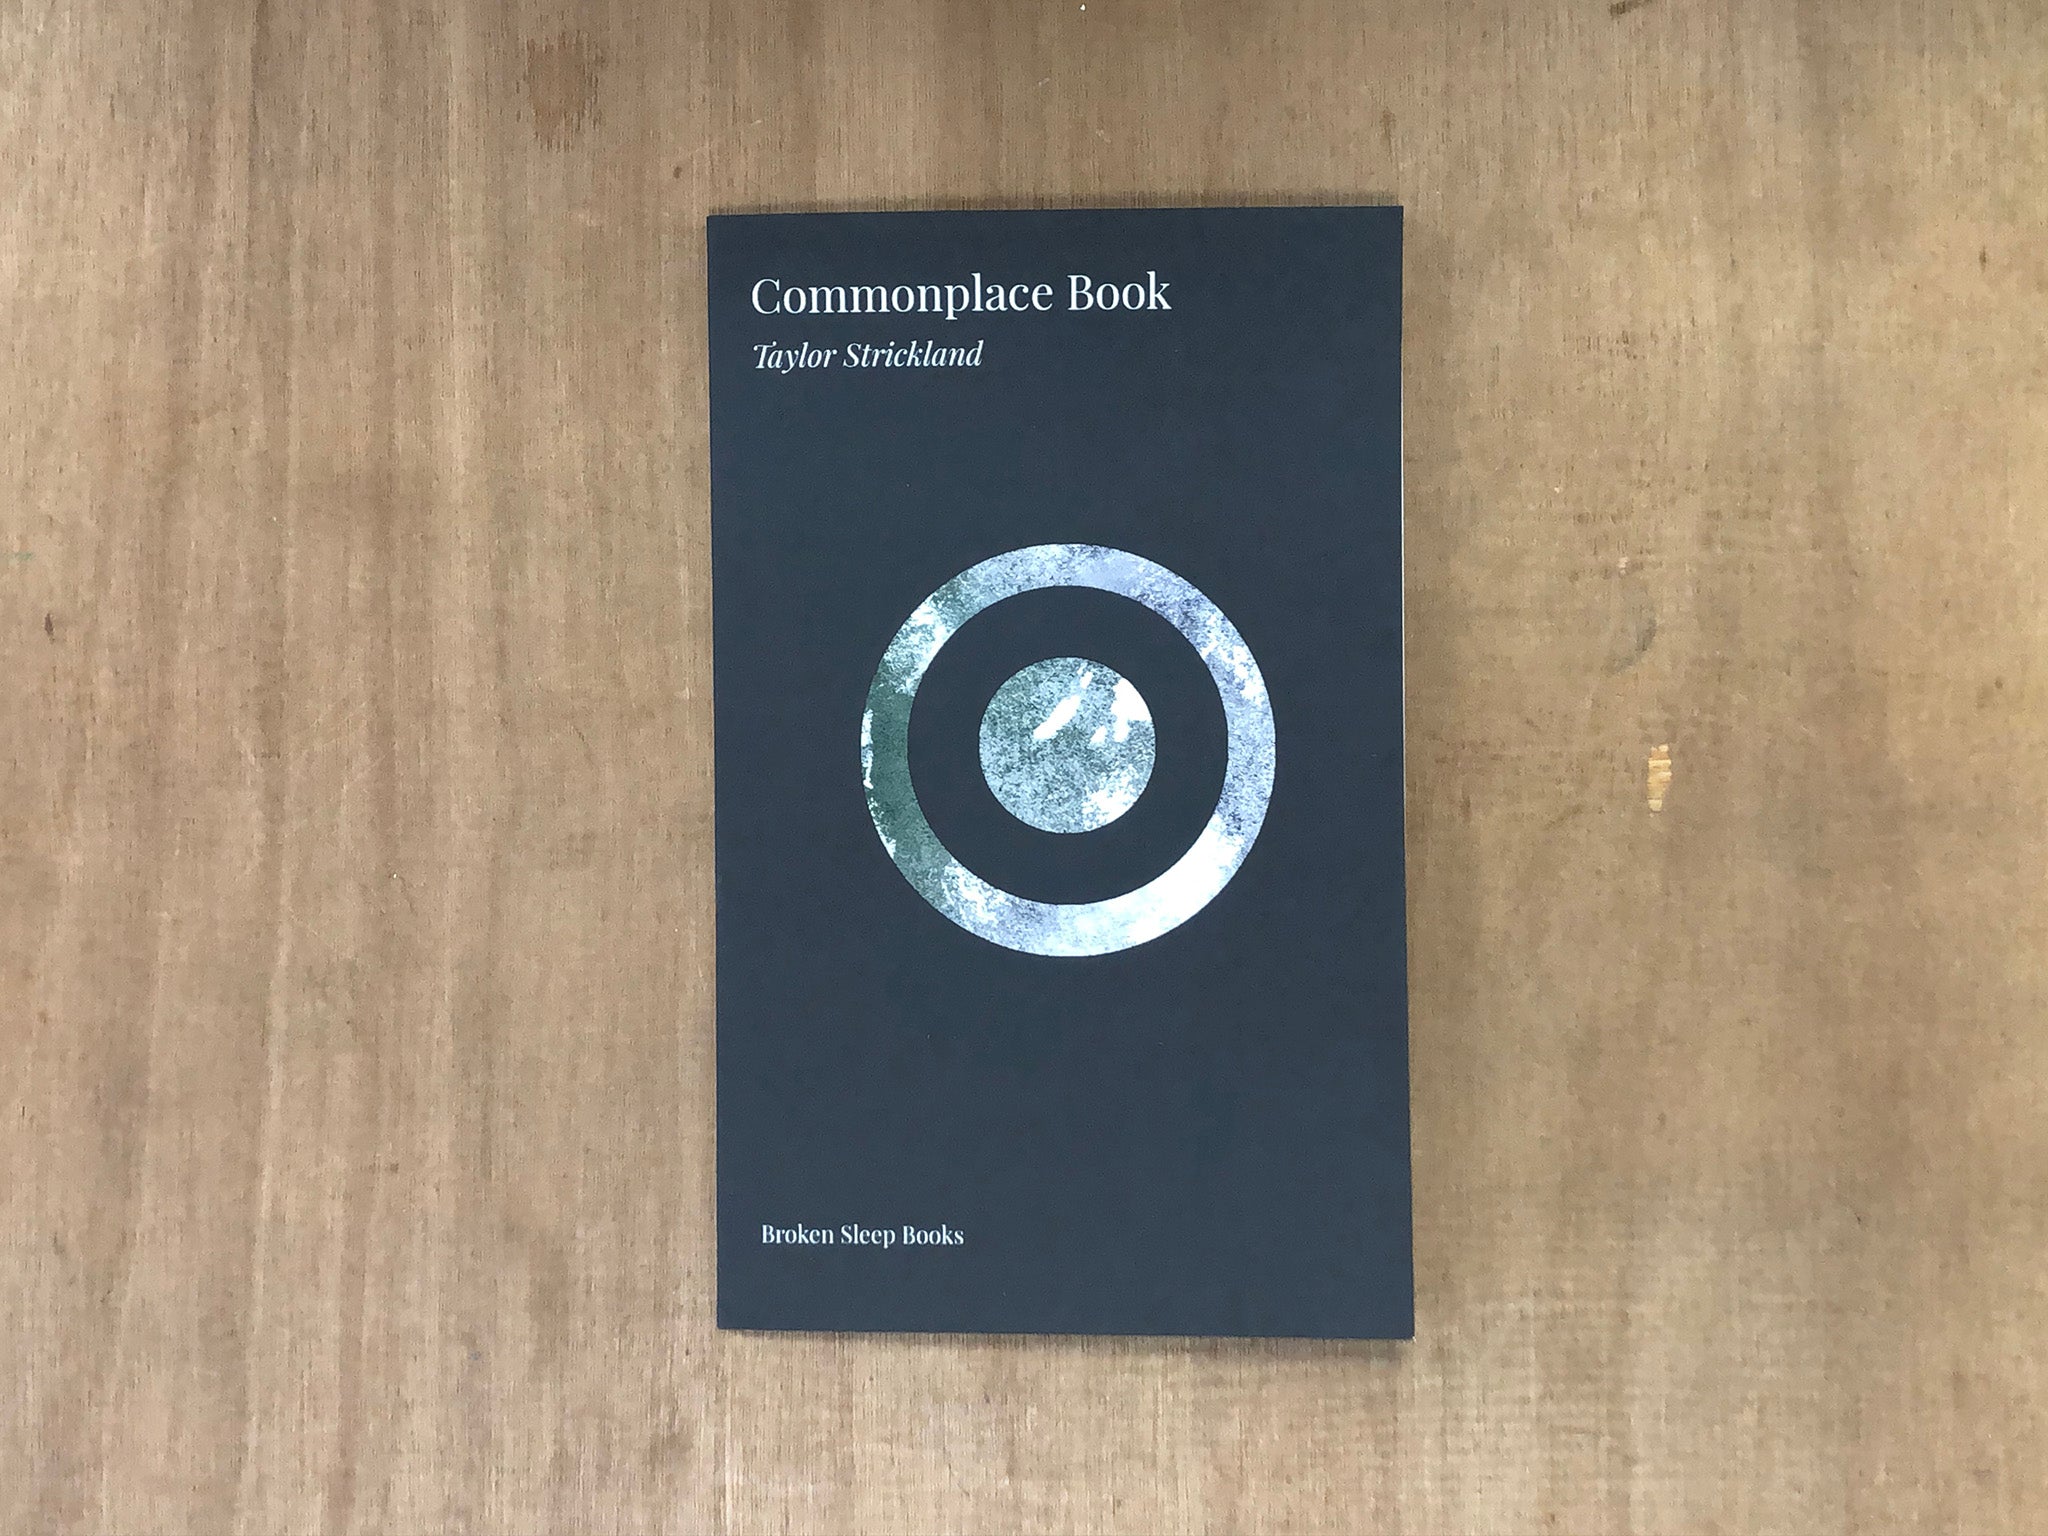 COMMONPLACE BOOK by Taylor Strickland